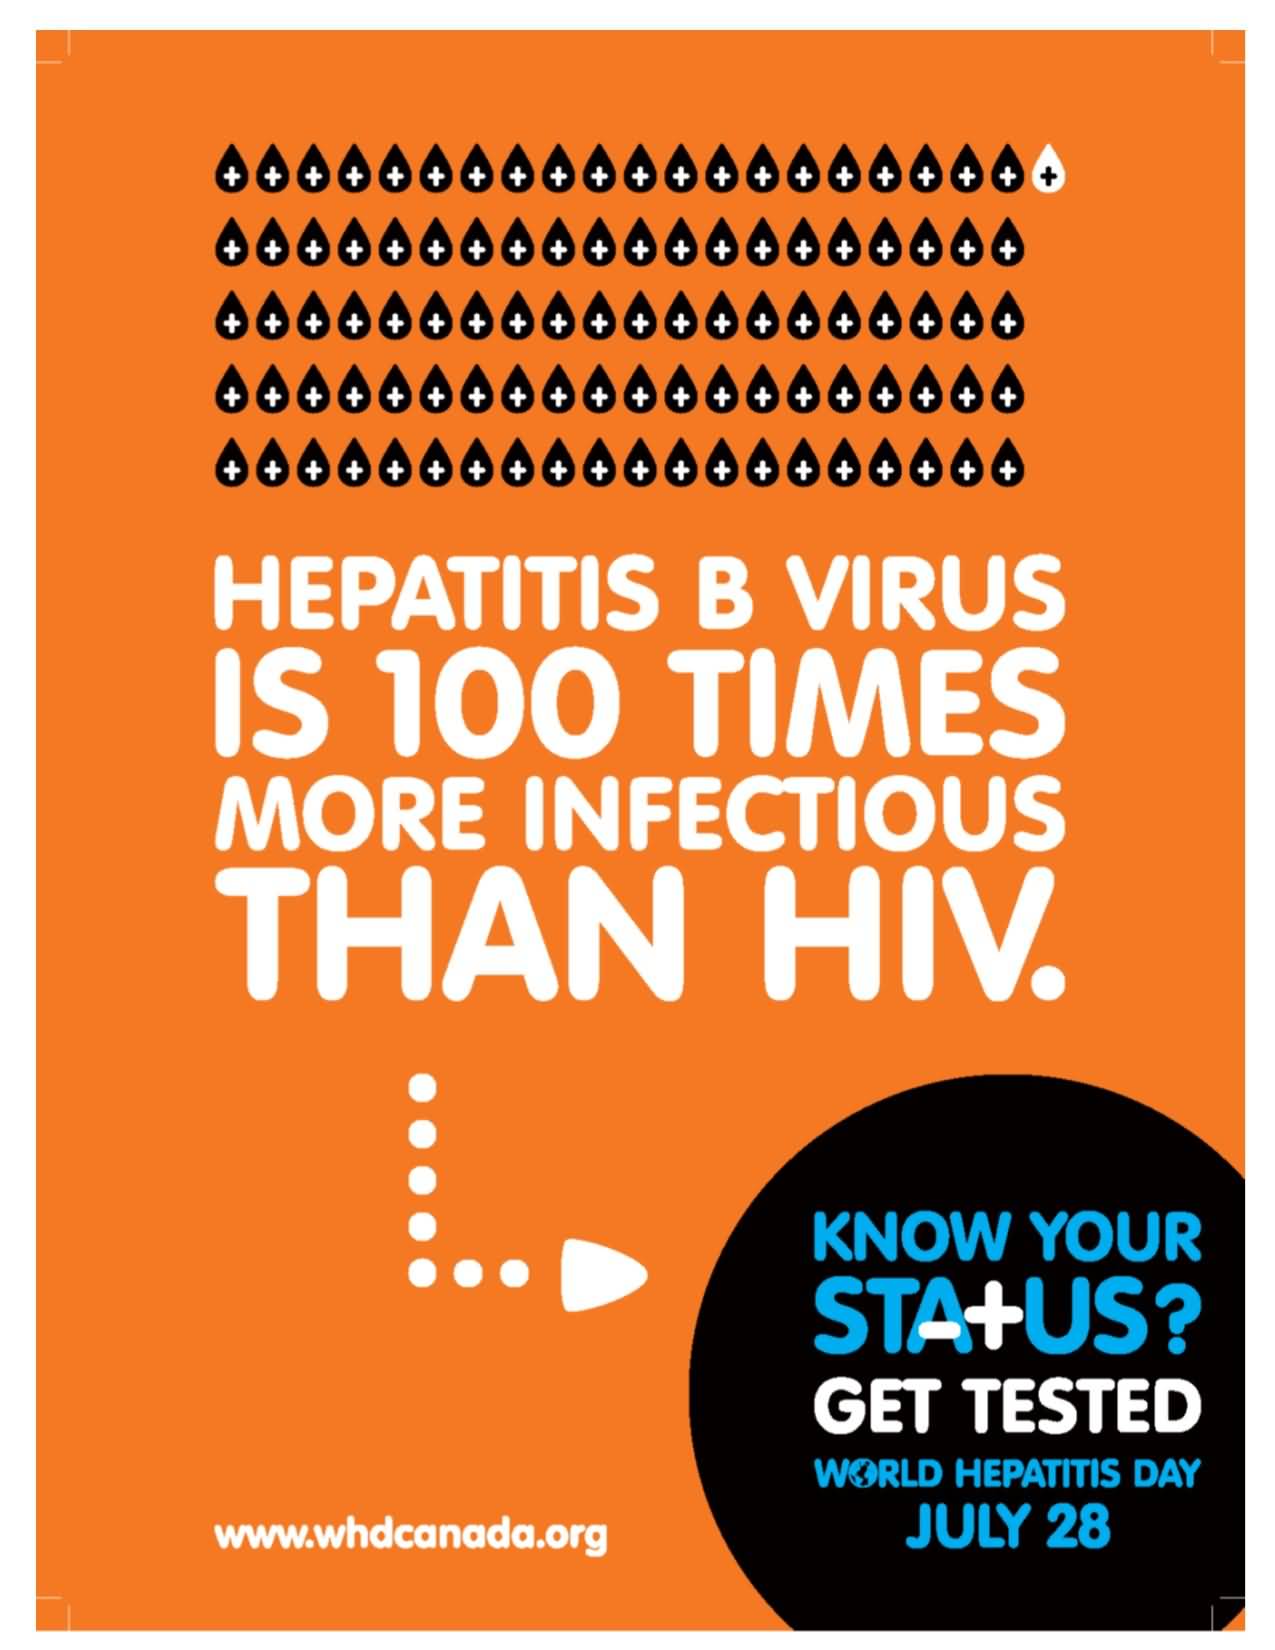 Hepatitis B Virus Is 100 Times More Infectious Than HIV - World Hepatitis Day